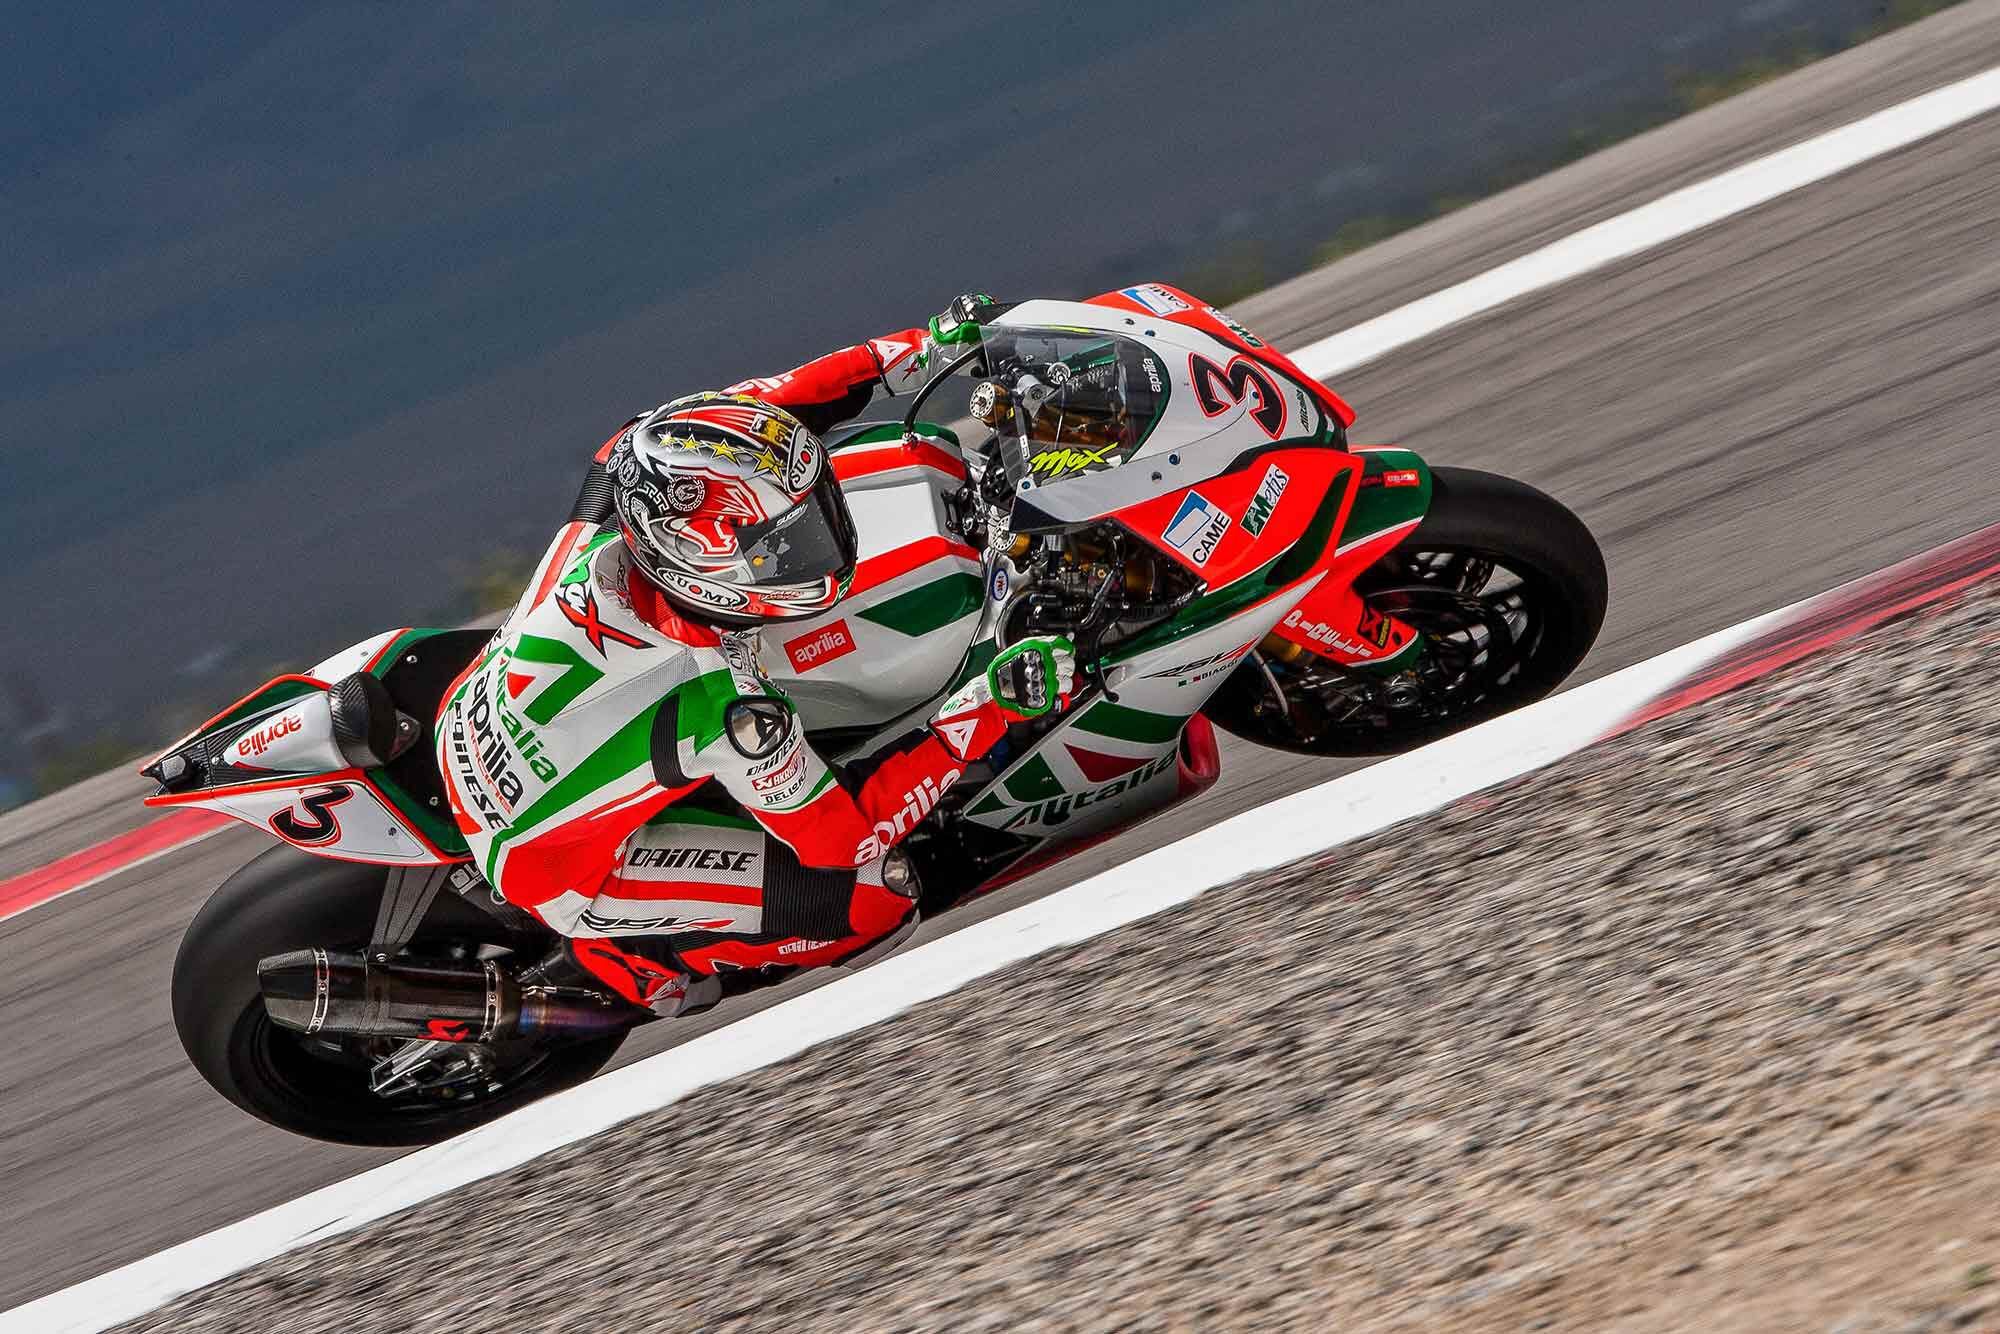 Biaggi's relationship with Aprilia remains close as he won multiple championships on the brand.